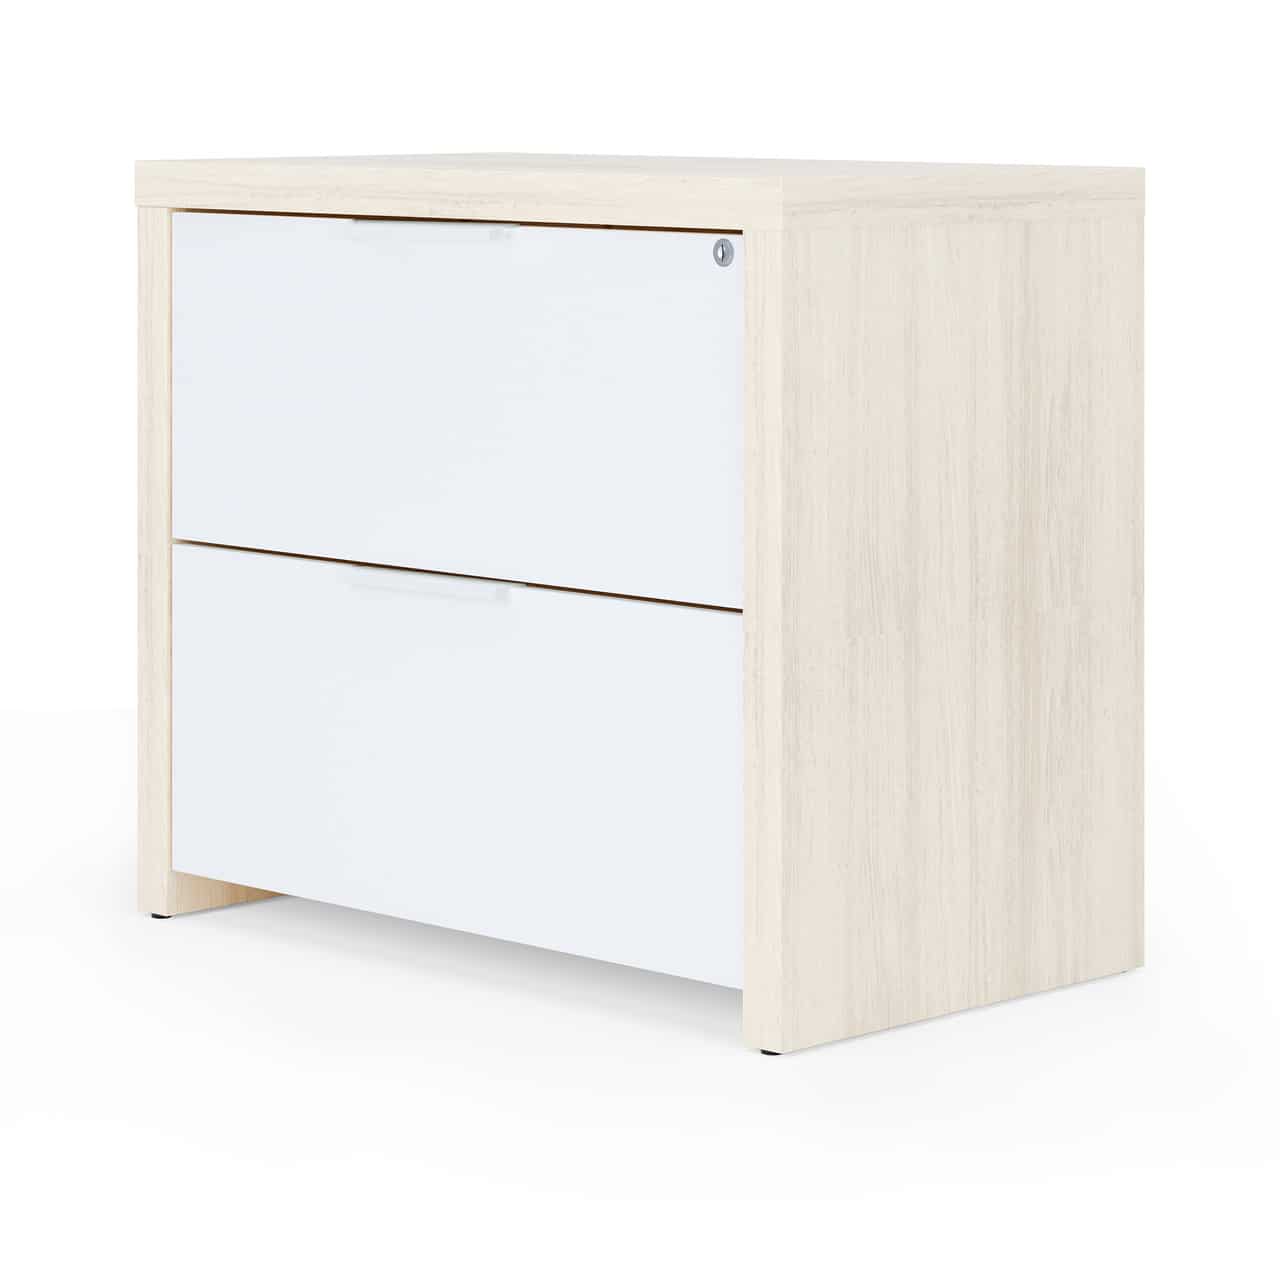 2 drawer lateral, white drawers, maple outside, laminate, modern